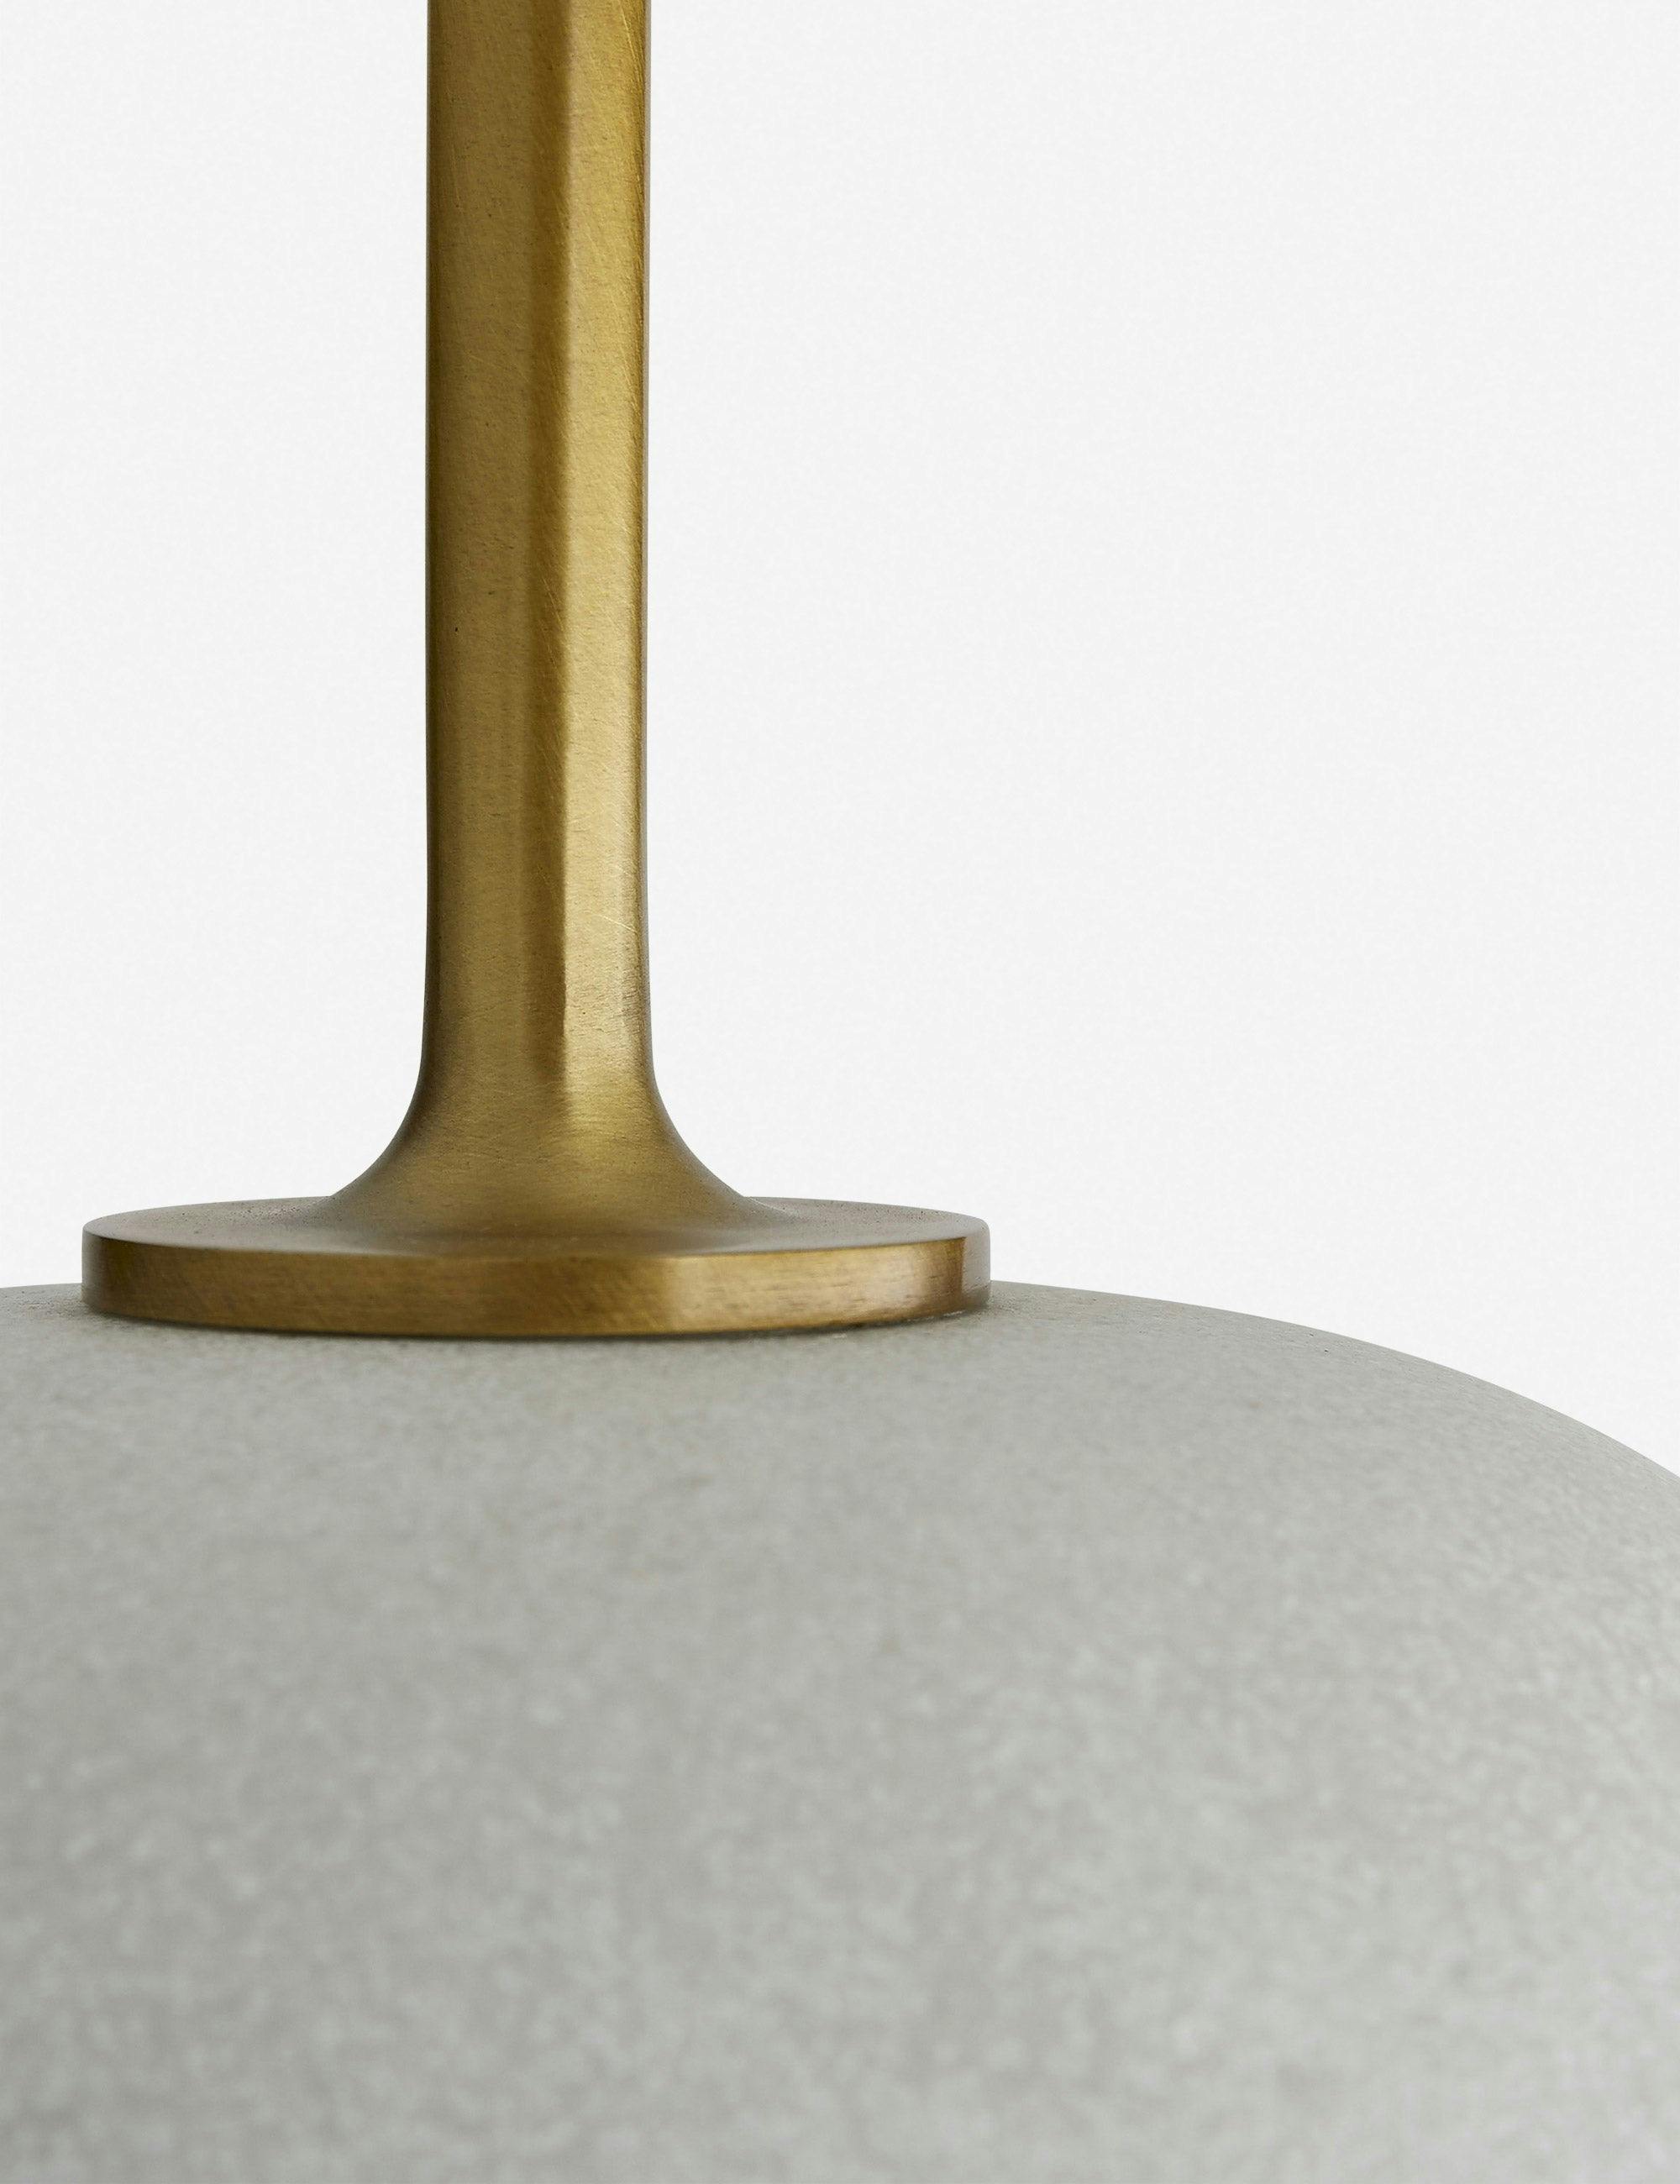 Colton Table Lamp by Arteriors